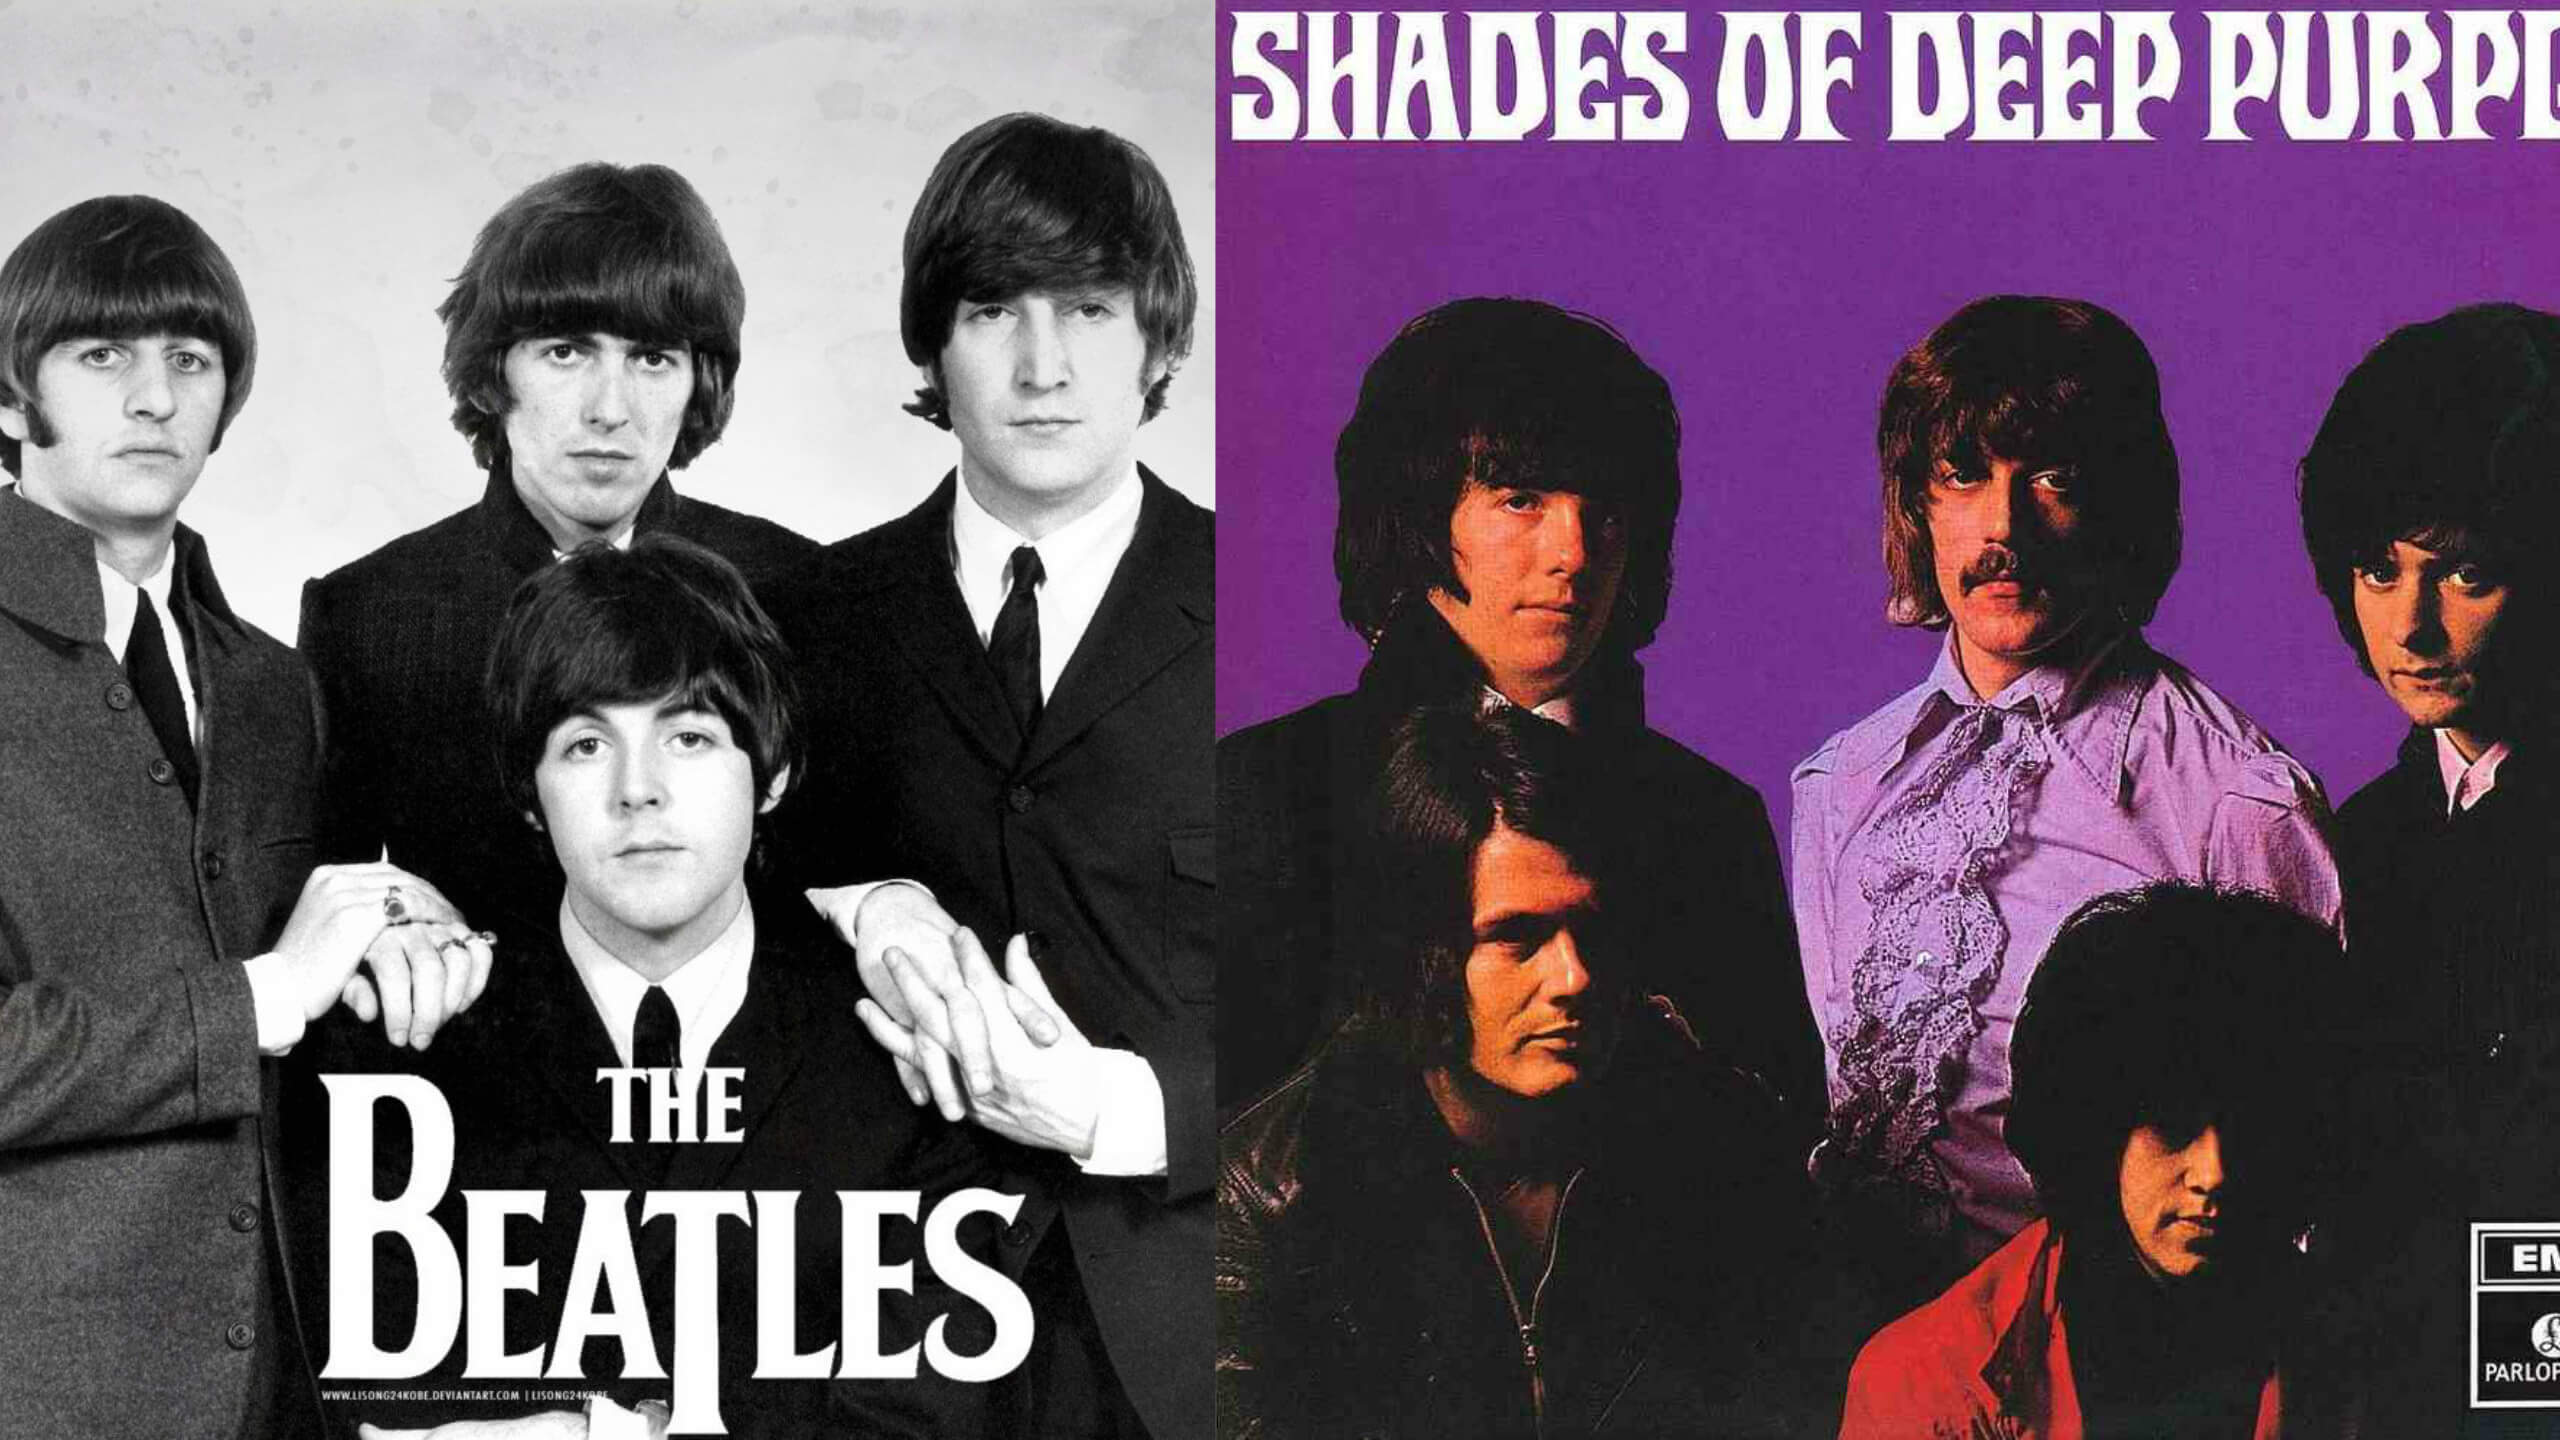 The Beatles are the biggest band of the history of rock and roll, that is indisputable, their influence on this genre is something out of this world. A great example of their importance is the number of great bands they have influenced.  And many of those bands paid tribute to them and Deep Purple was on that list.